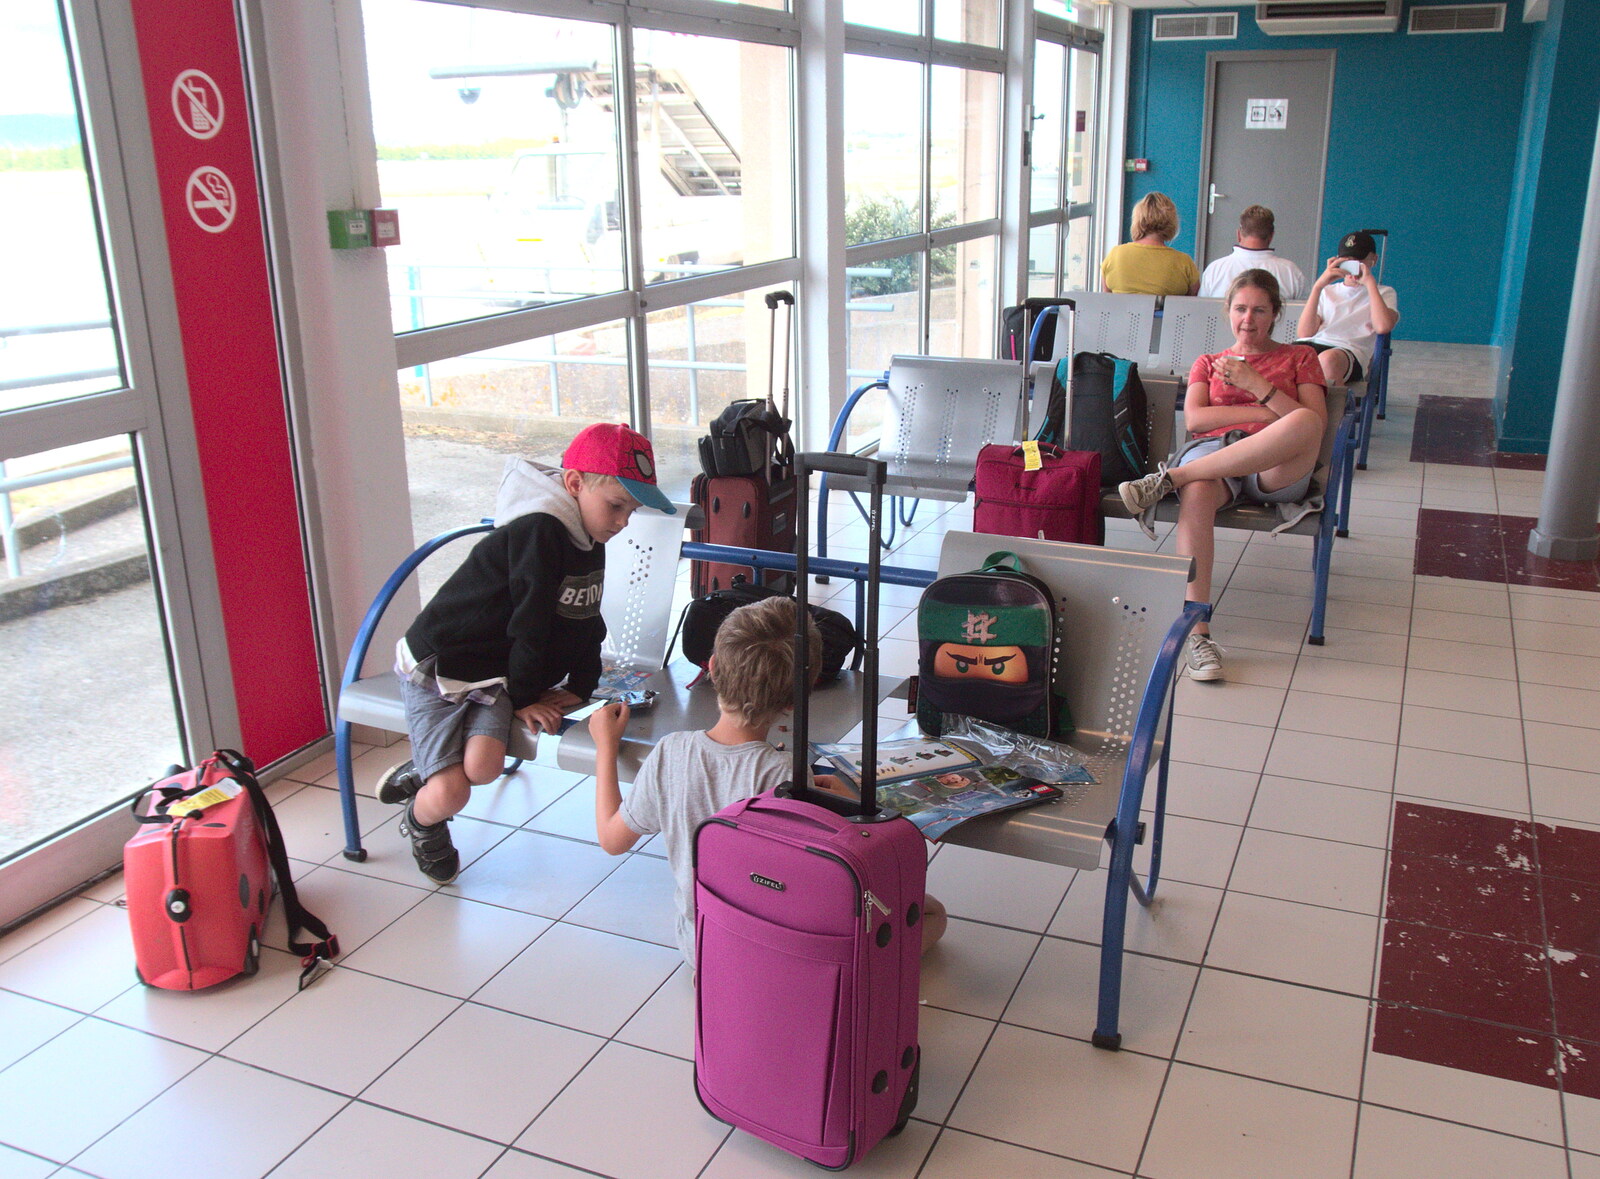 Waiting for our plane to land from The Château Comtal, Lastours and the Journey Home, Carcassonne, Aude, France - 14th August 2018